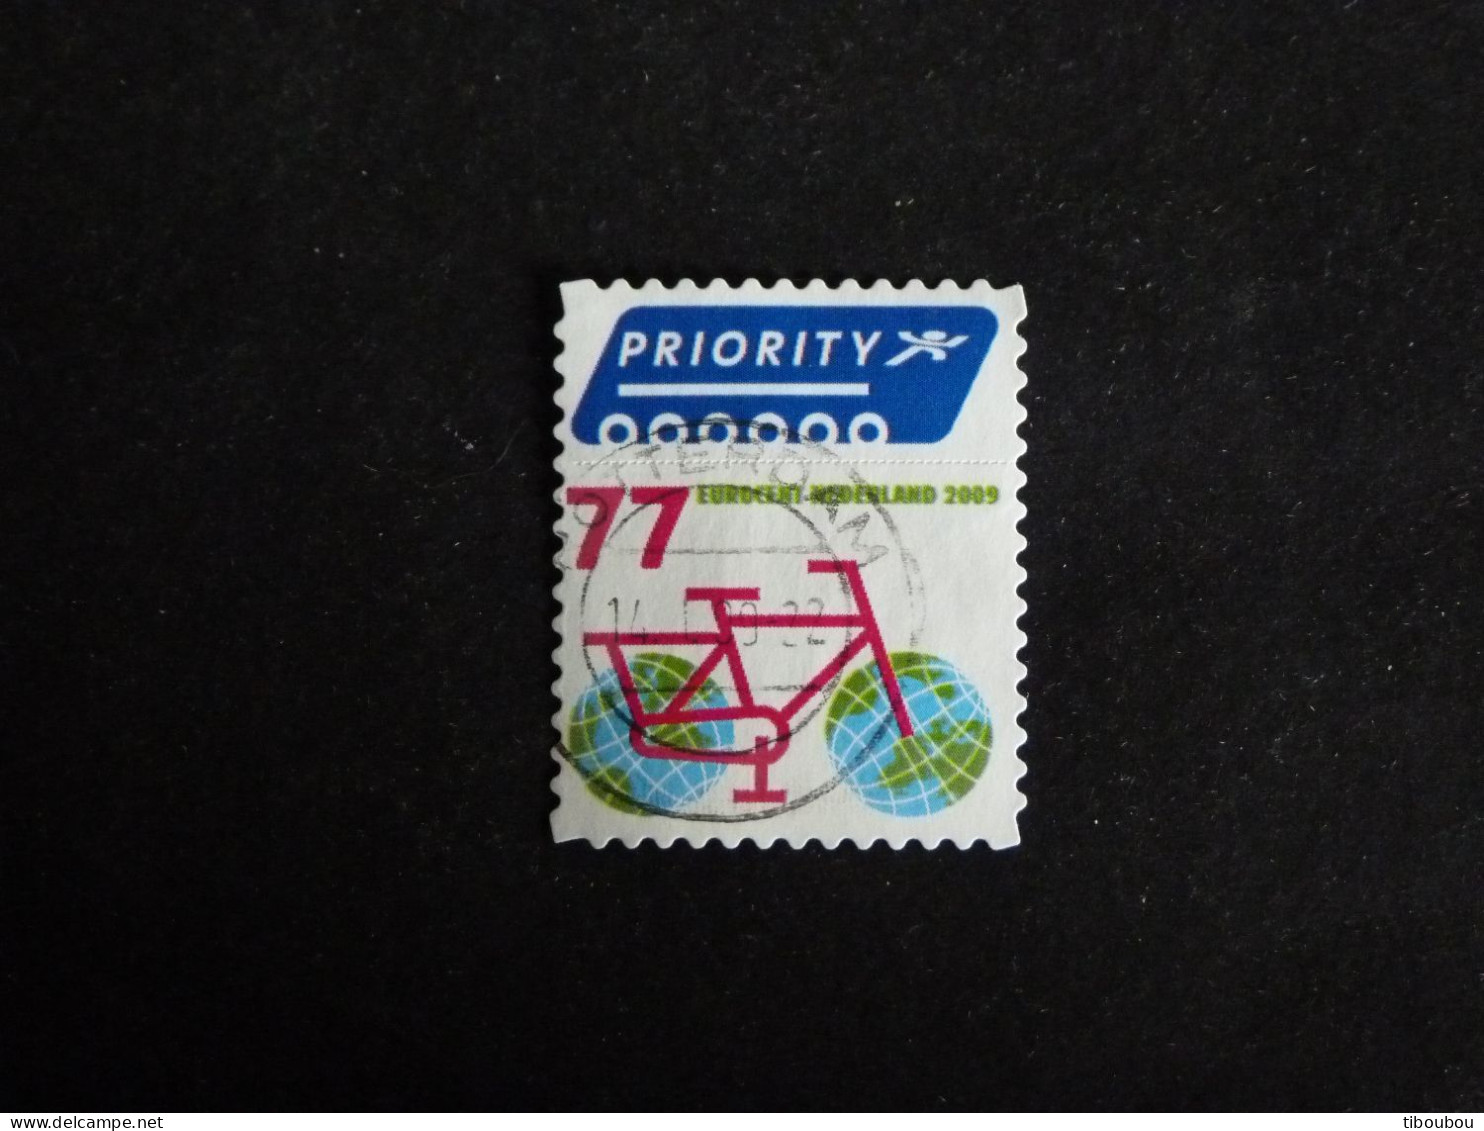 PAYS BAS NEDERLAND YT 2561 OBLITERE - PROTECTION ENVIRONNEMENT VELO BICYCLETTE - Used Stamps